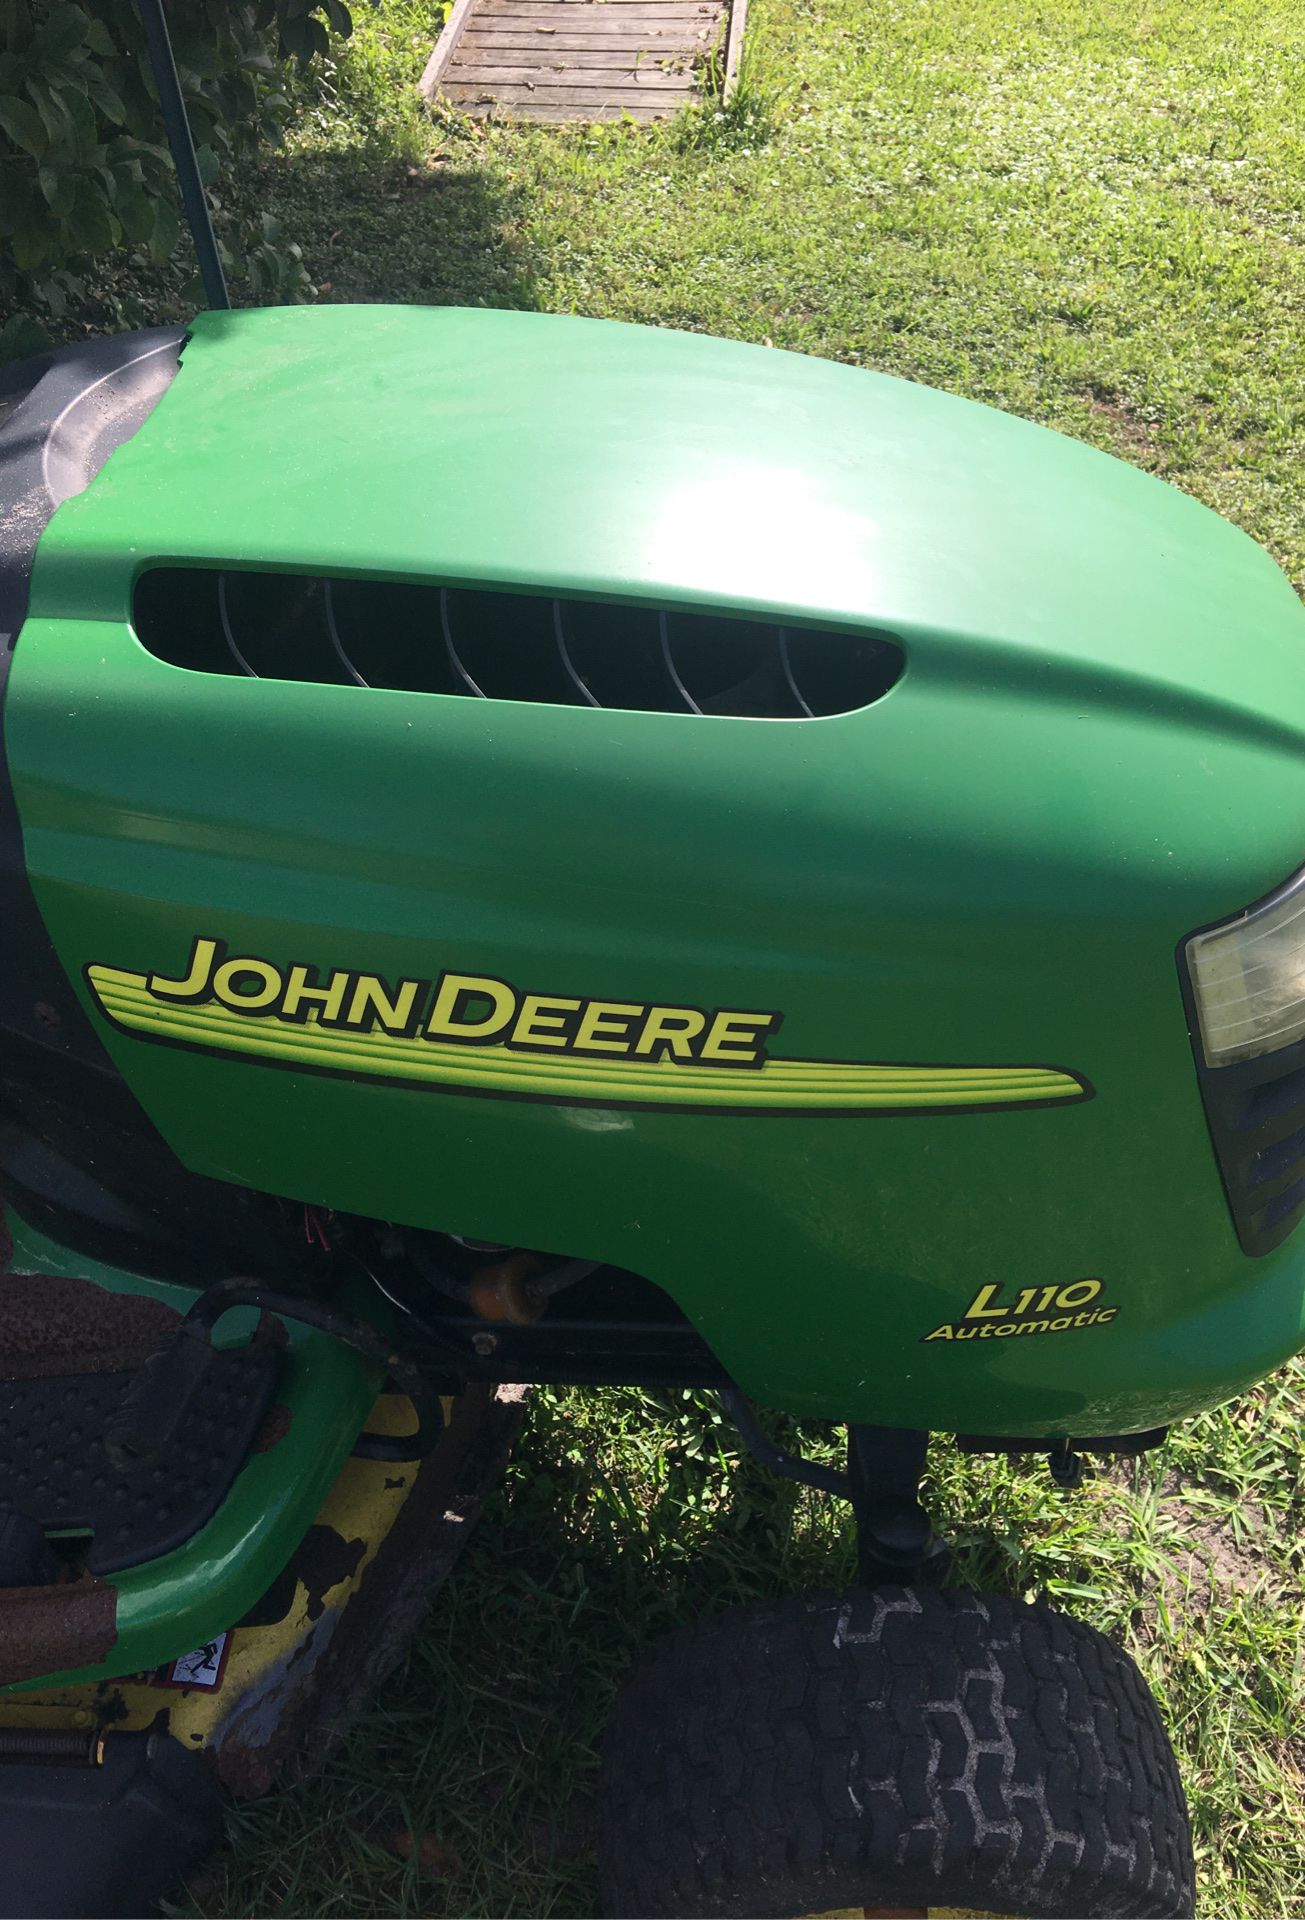 JOHN DEERE, Hood W/Headlights (L110 automatic) this is a PART off a lawn tractor mower